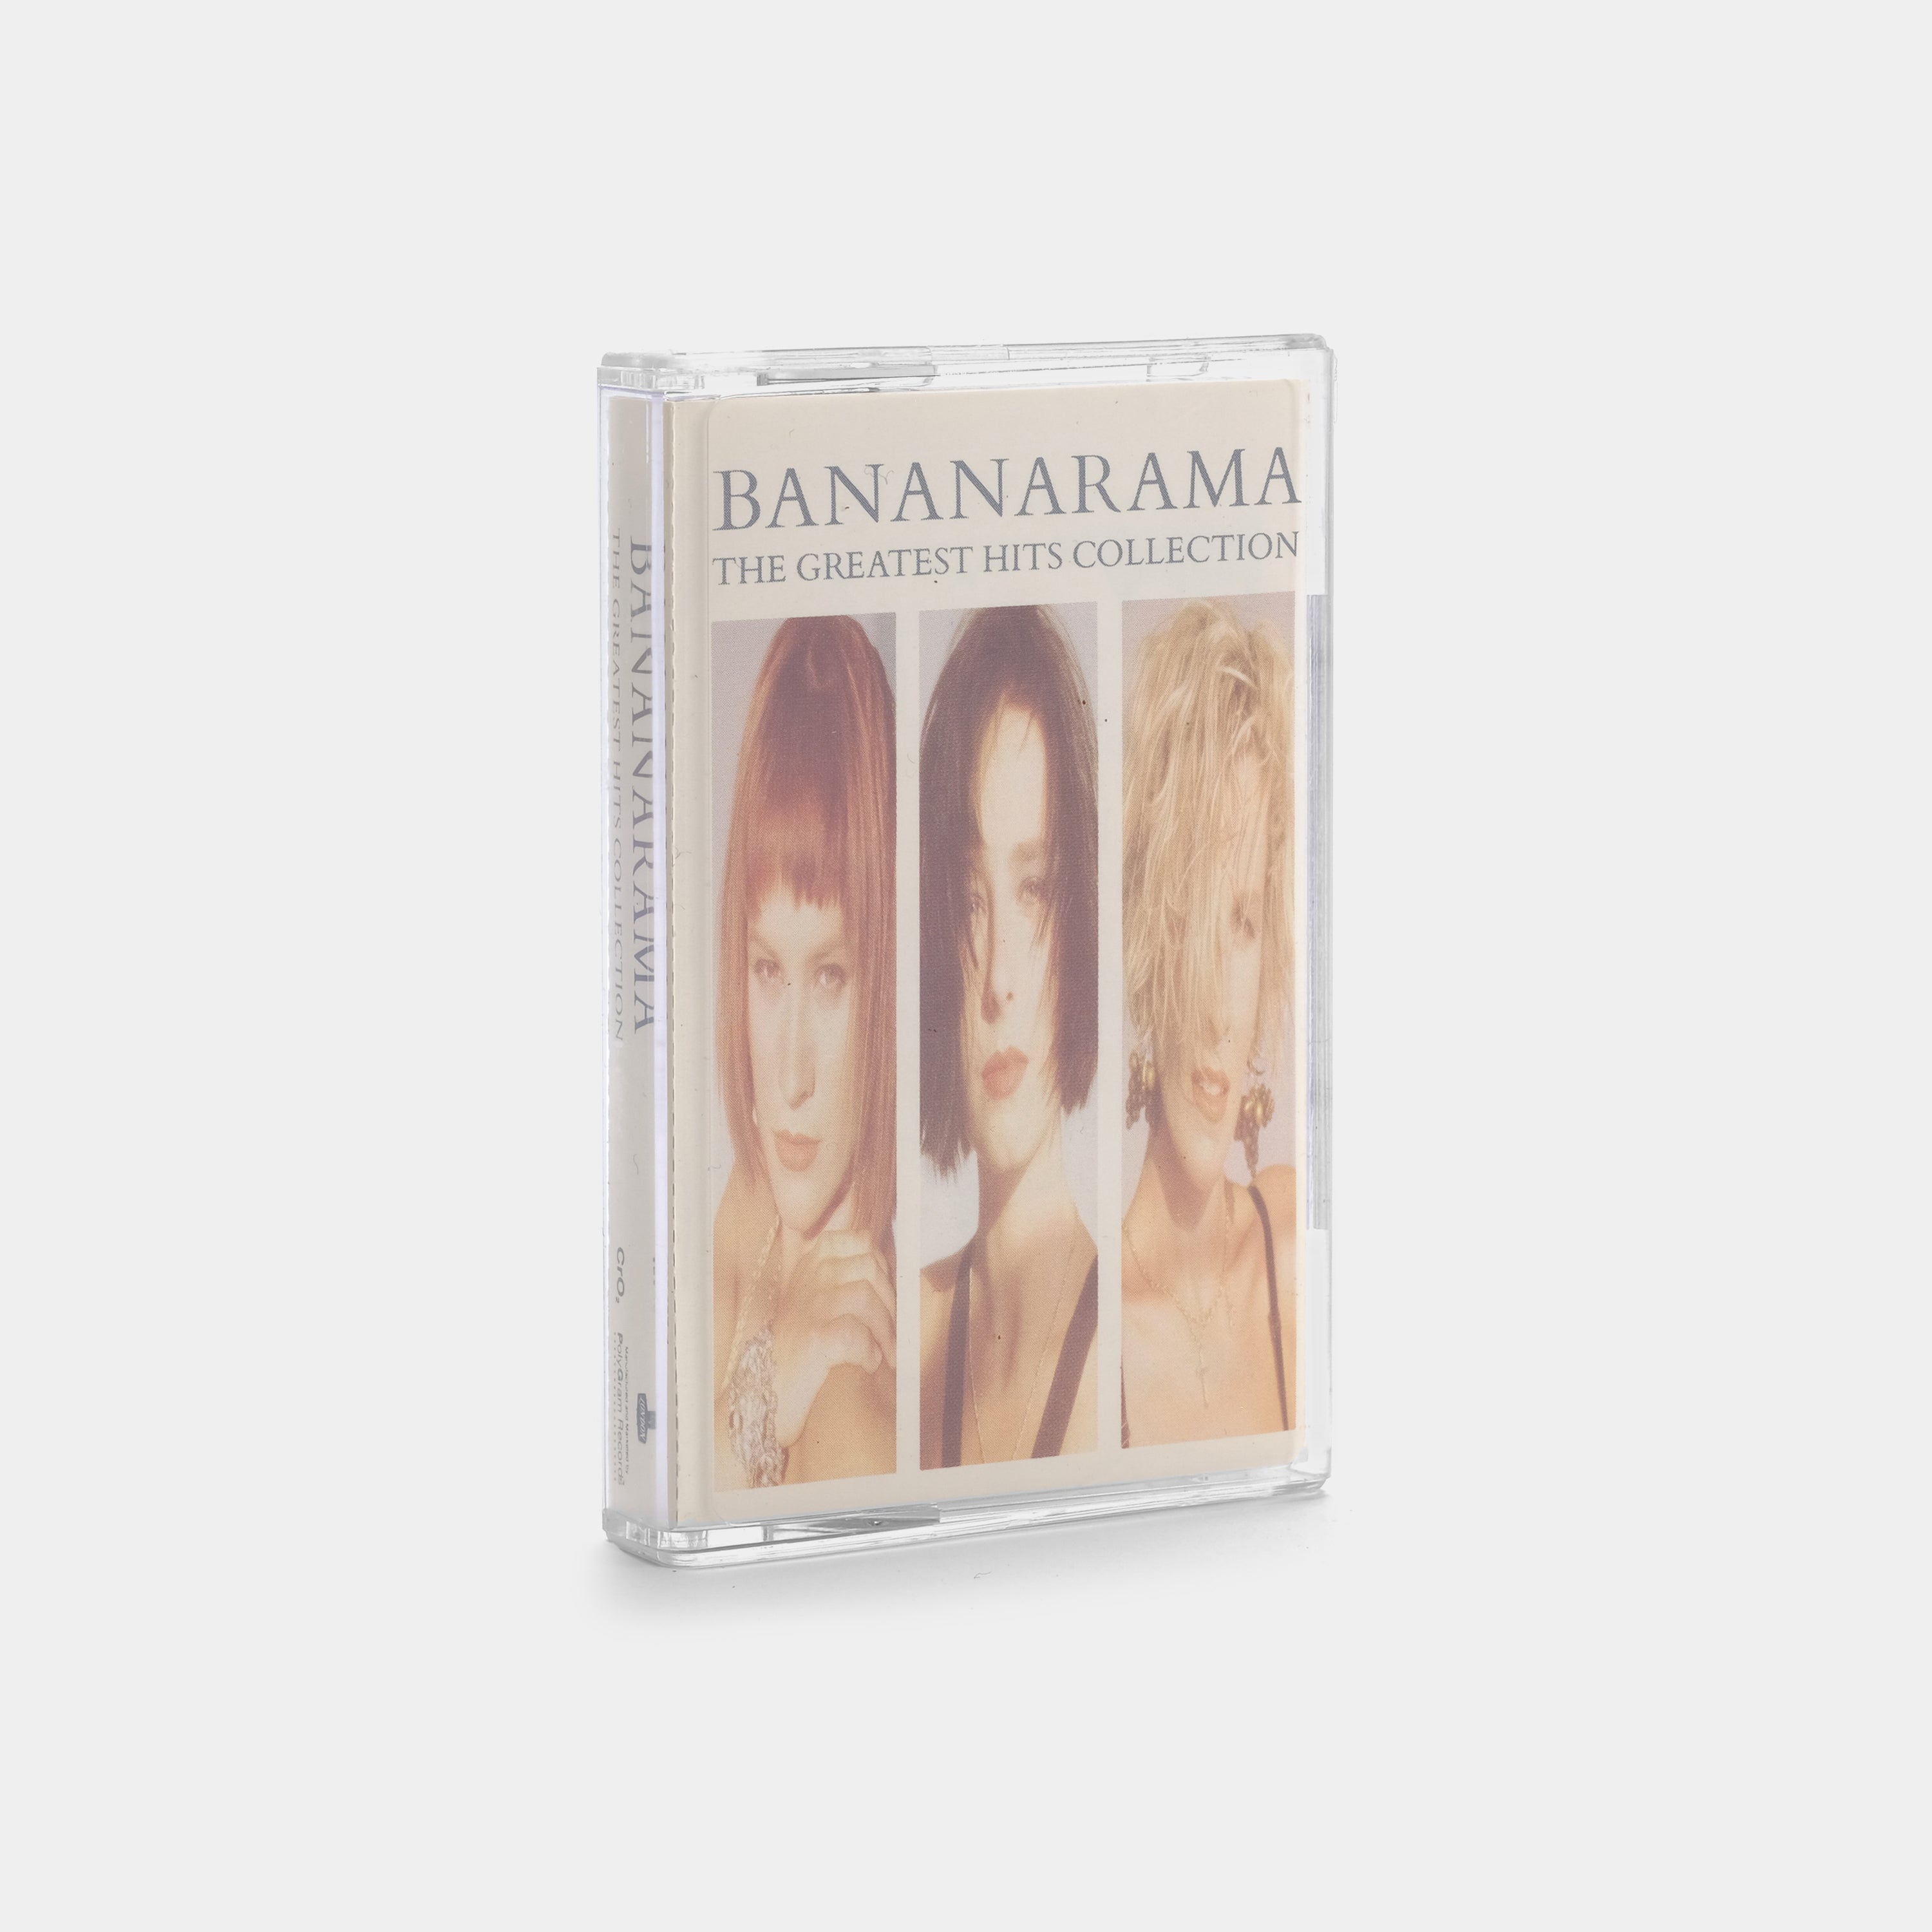 Bananarama - The Greatest Hits Collection Cassette Tape